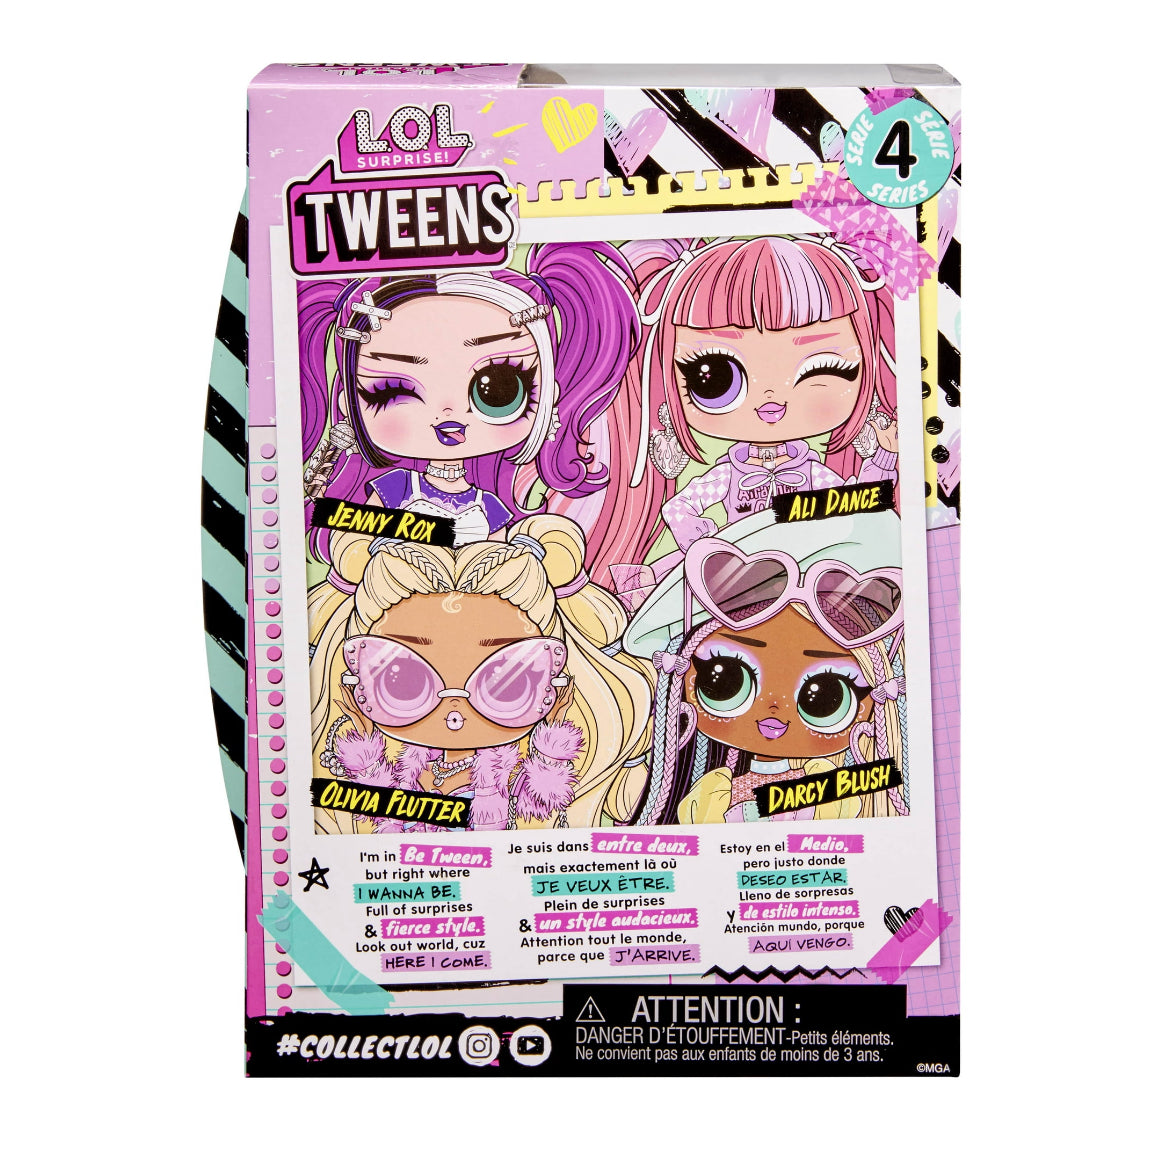 LOL Surprise Tweens Series 4 Fashion Doll Darcy Blush with 15 Surprises 58874